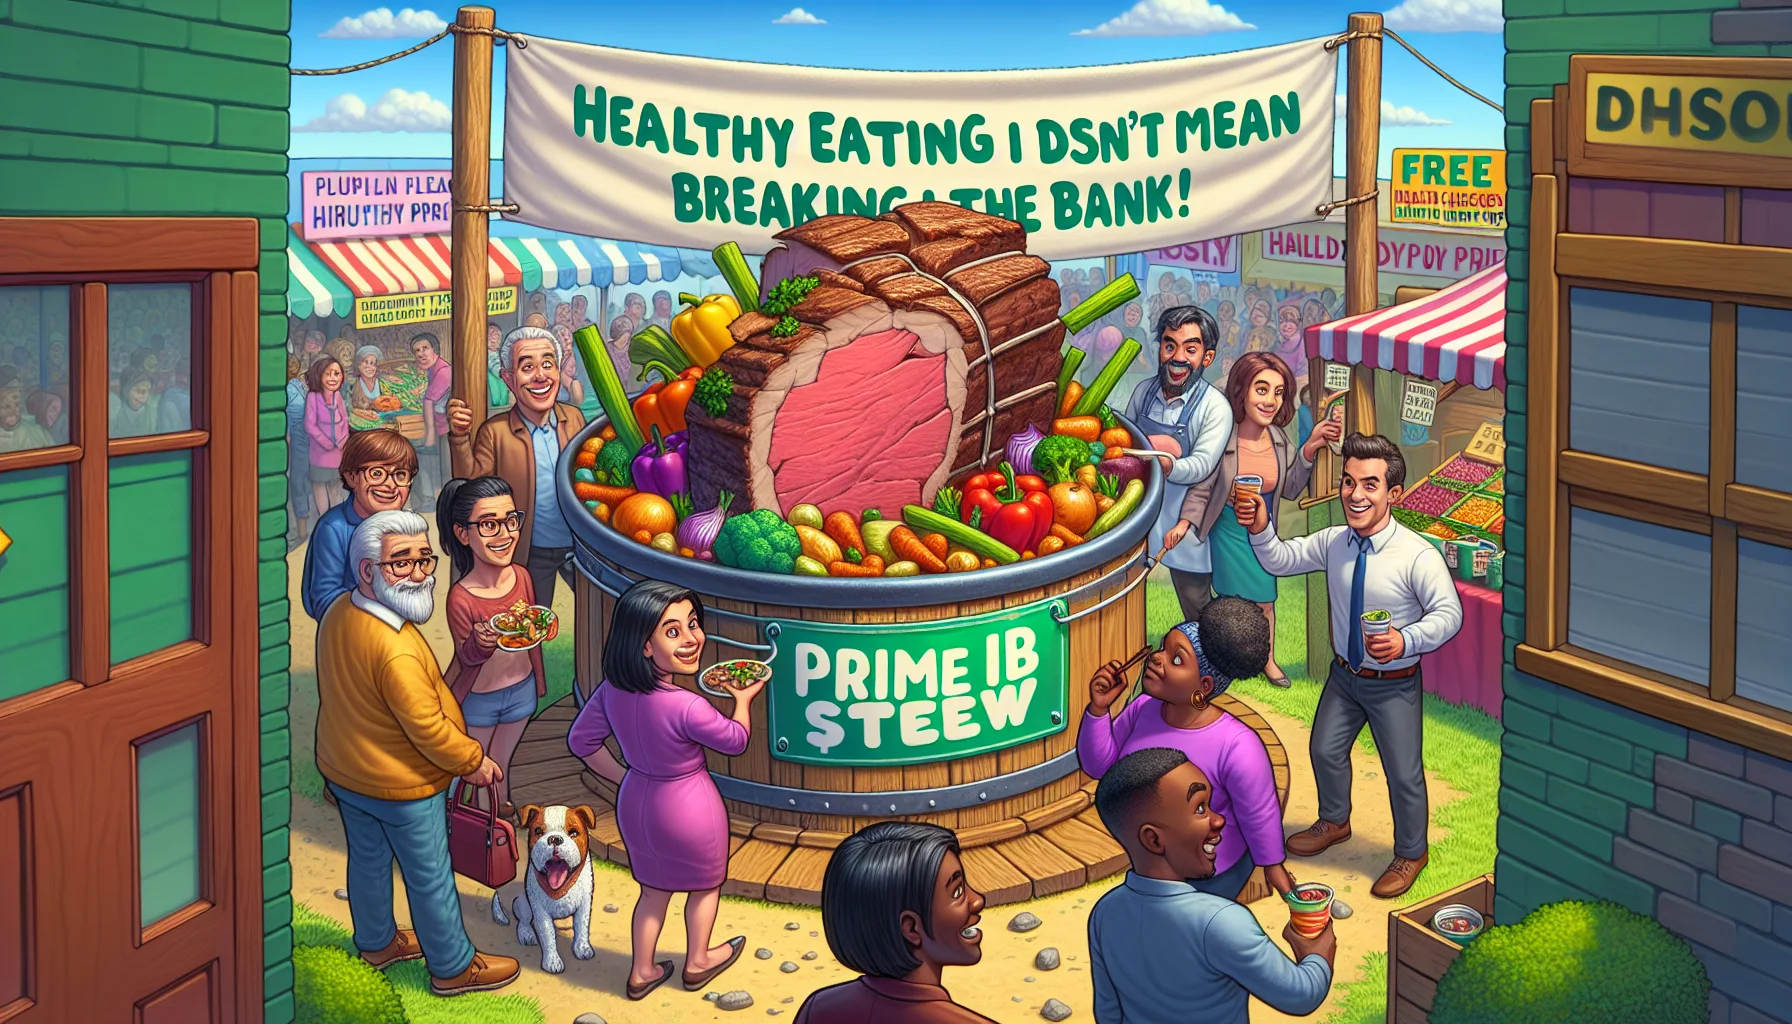 Create a humorous scene focusing on a prime rib stew. The stew, full of colorful vegetables and tender meat, is located right in the middle of a whimsical 'Eat healthily for less' fair. A large banner with the slogan 'Healthy eating doesn't mean breaking the bank!' flutters in the background. A diverse group of people, including a smiling Caucasian man, an intrigued Middle-Eastern woman, and a curious Black teenager, are attracted by the allure of the delicious stew. All around are booths showcasing plentiful affordable produce and free health check-ups.